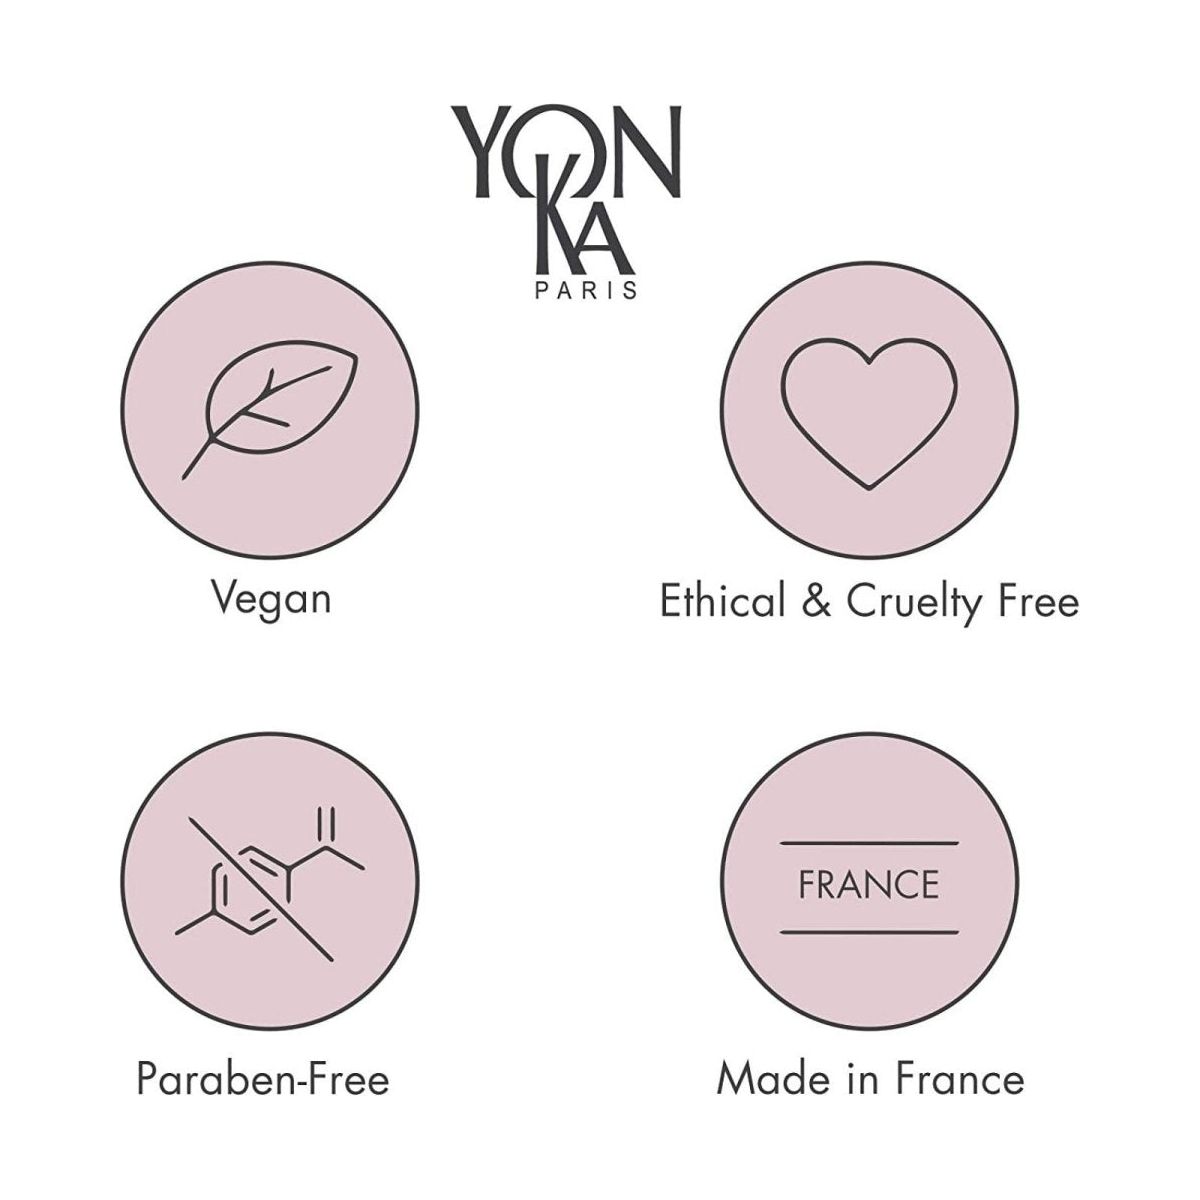 Yonka Paris | Phyto 58 PNG (Normal to Oily) | 40ml - DG International Ventures Limited